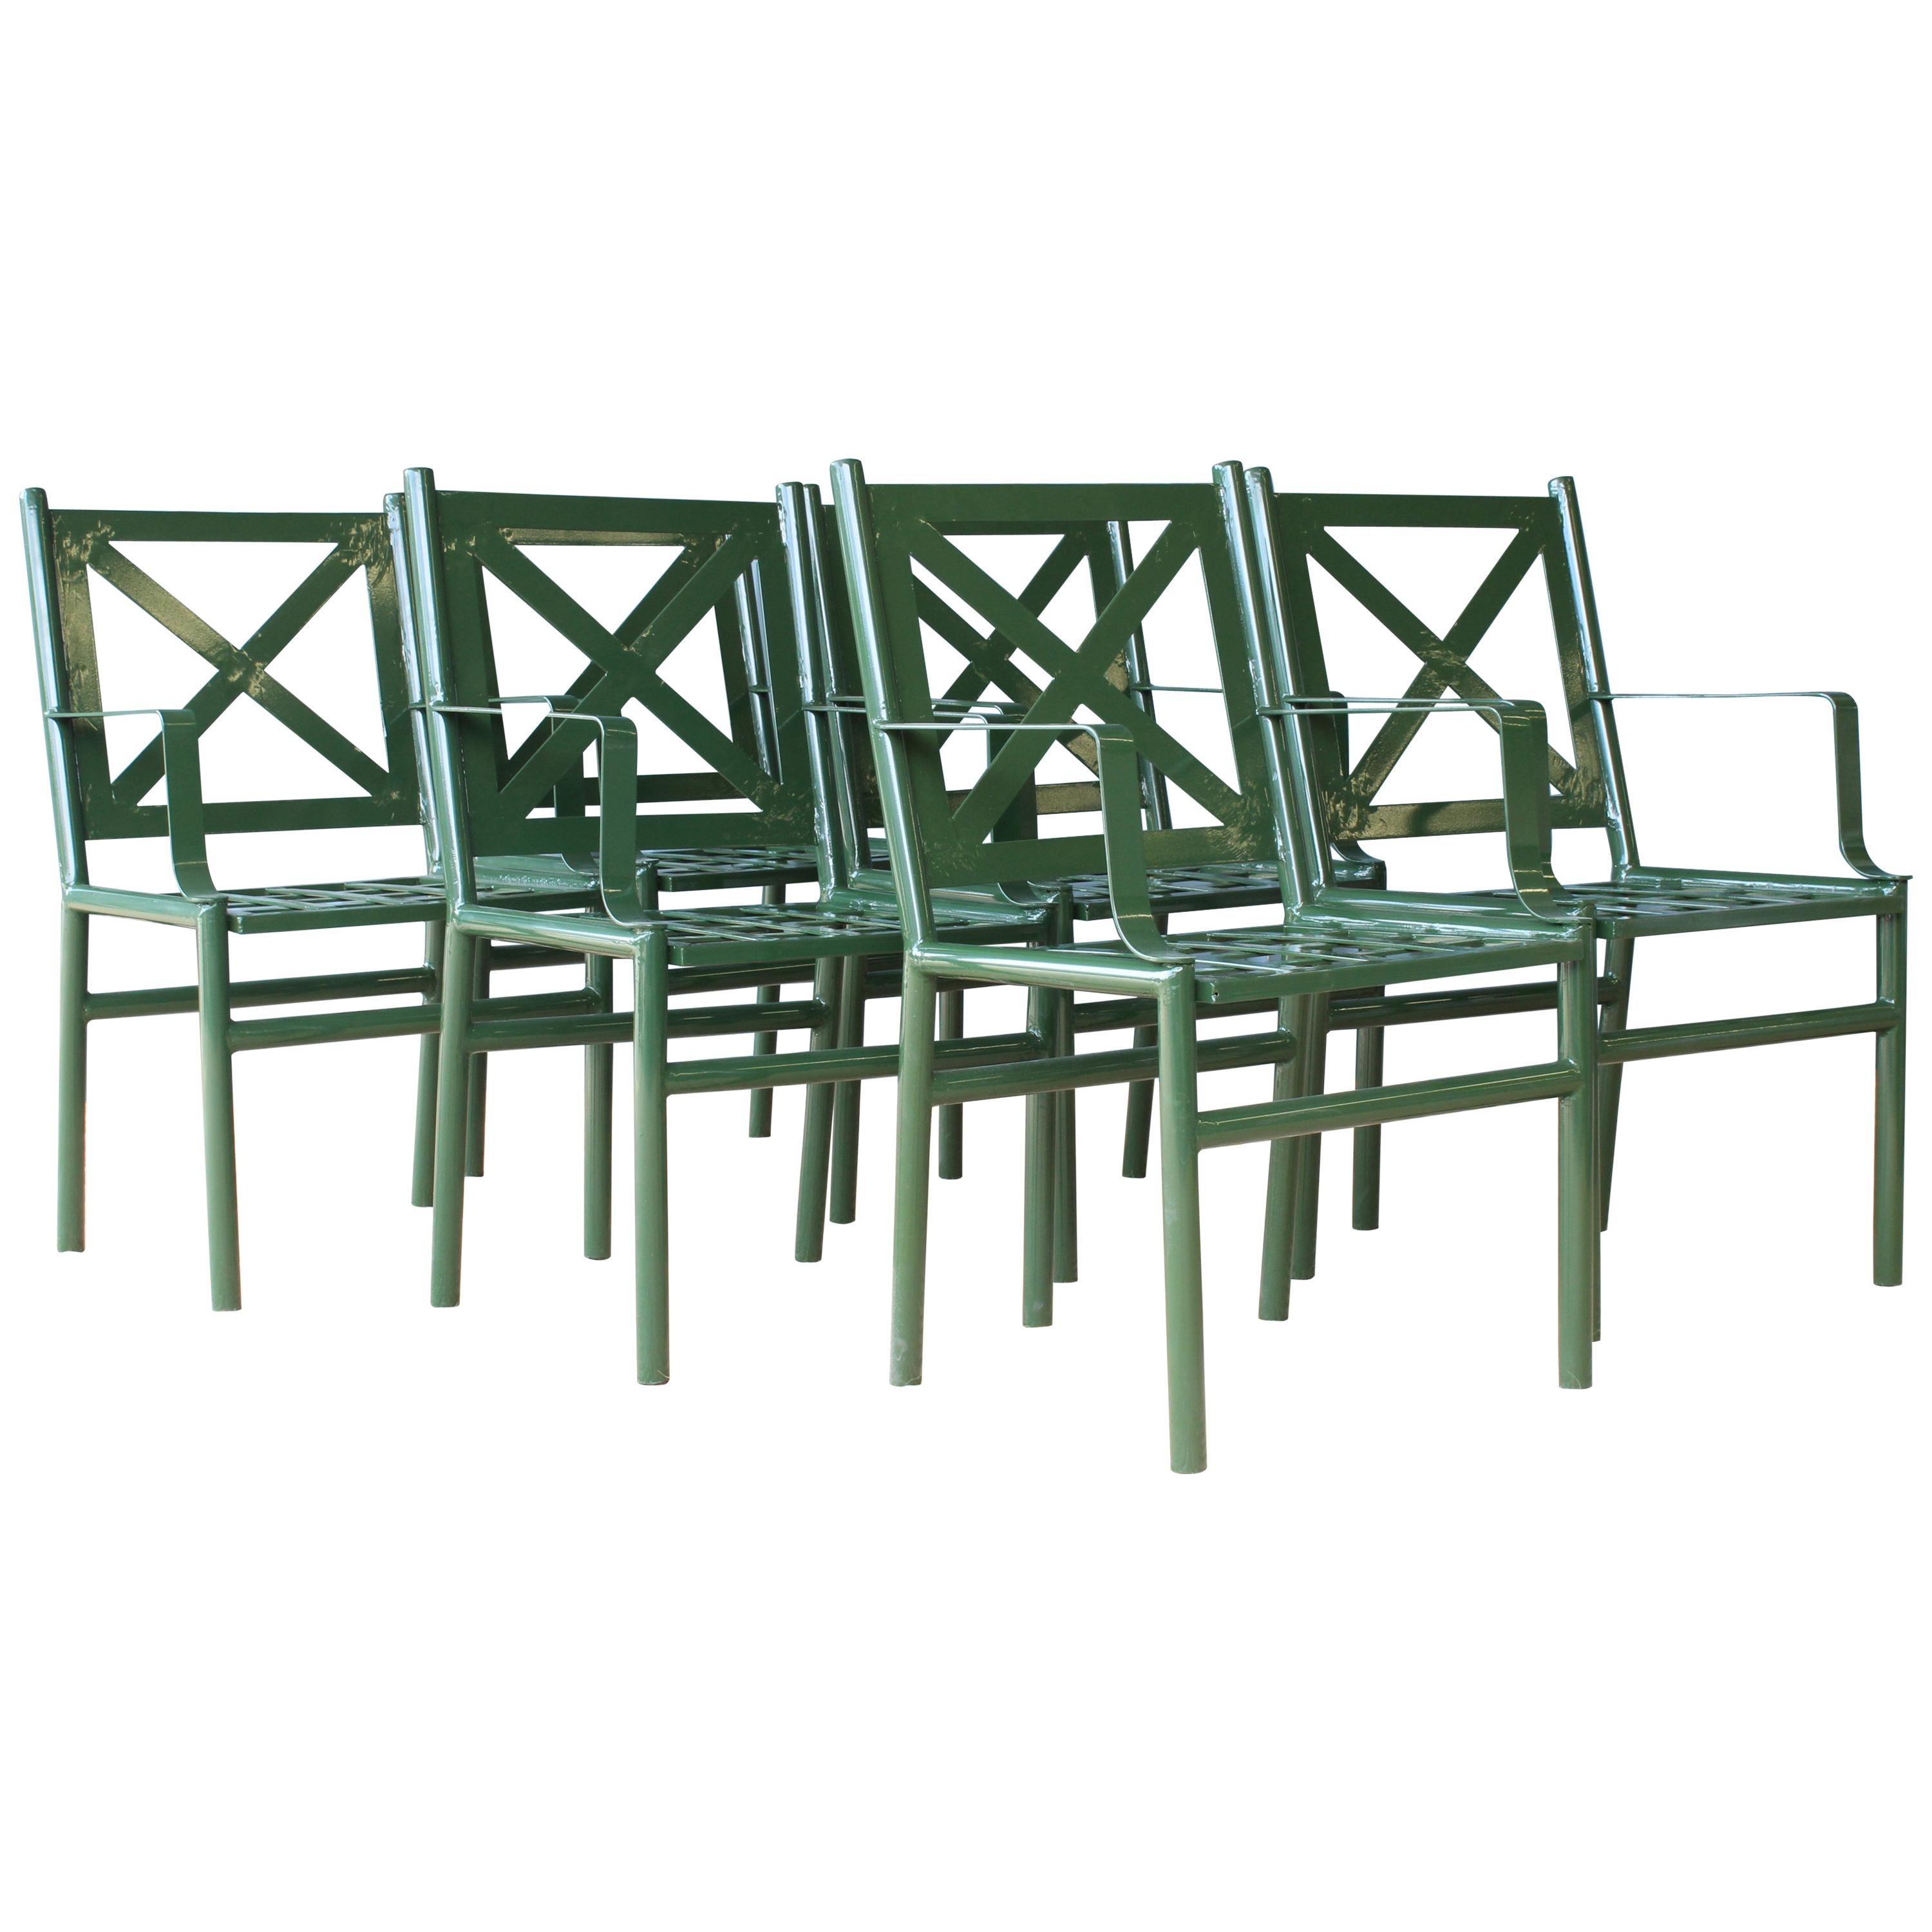 Green Outdoor Metal Patio Chairs, 16 Available